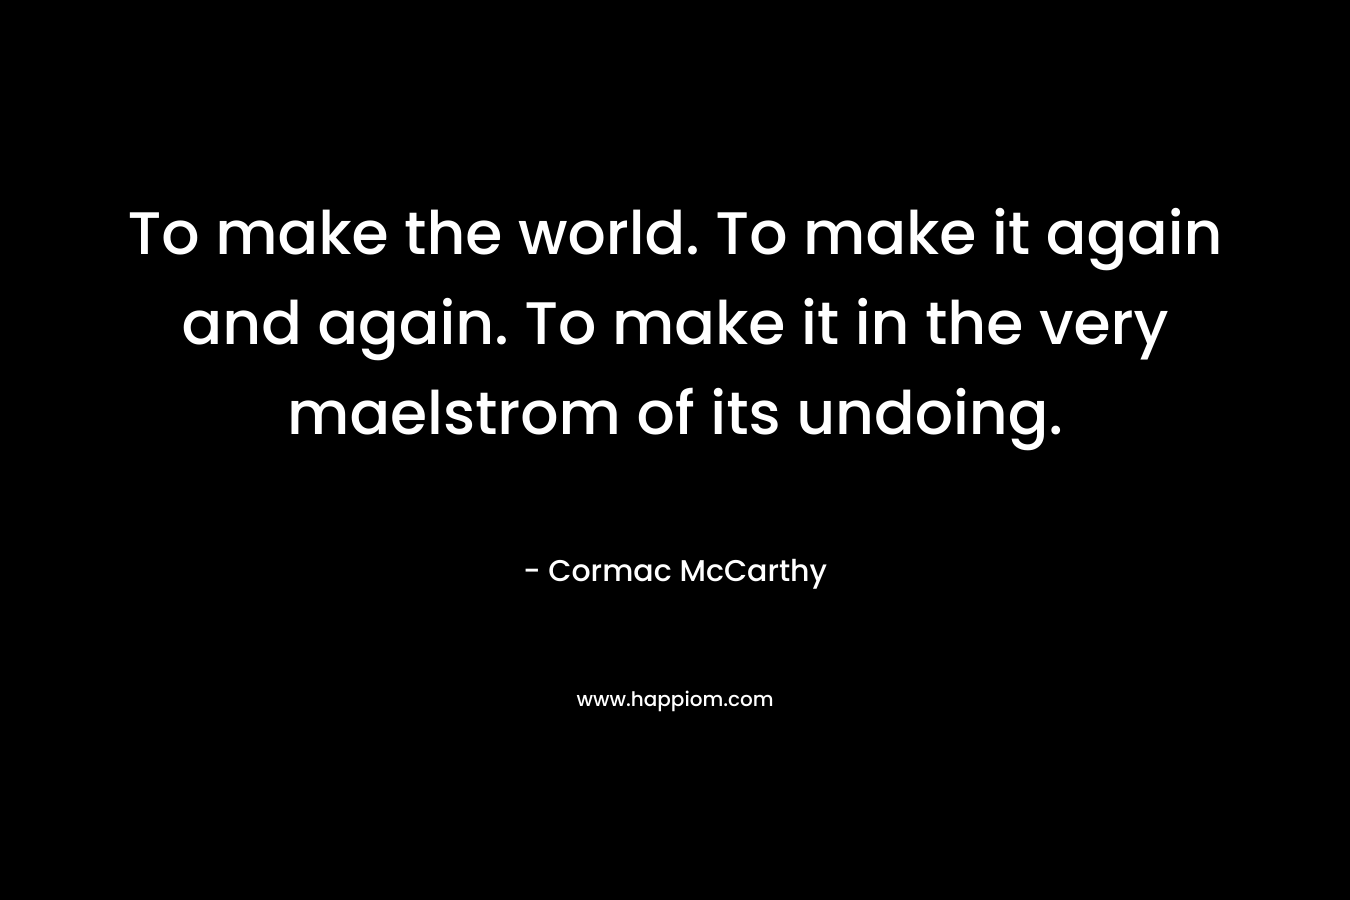 To make the world. To make it again and again. To make it in the very maelstrom of its undoing. – Cormac McCarthy